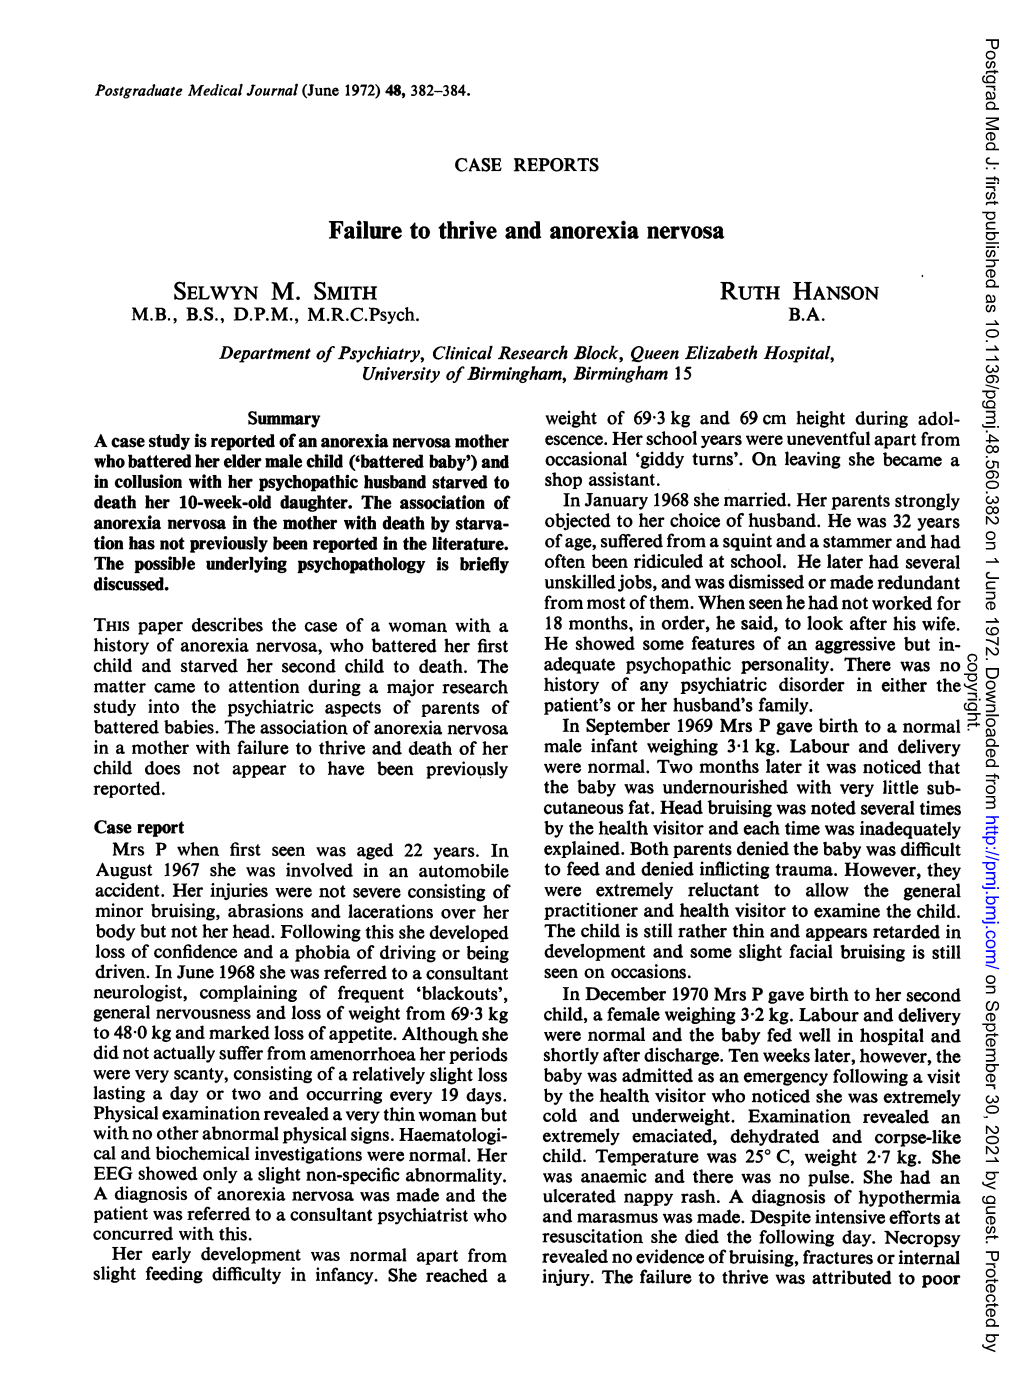 Failure to Thrive and Anorexia Nervosa SELWYN M. SMITH RUTH HANSON